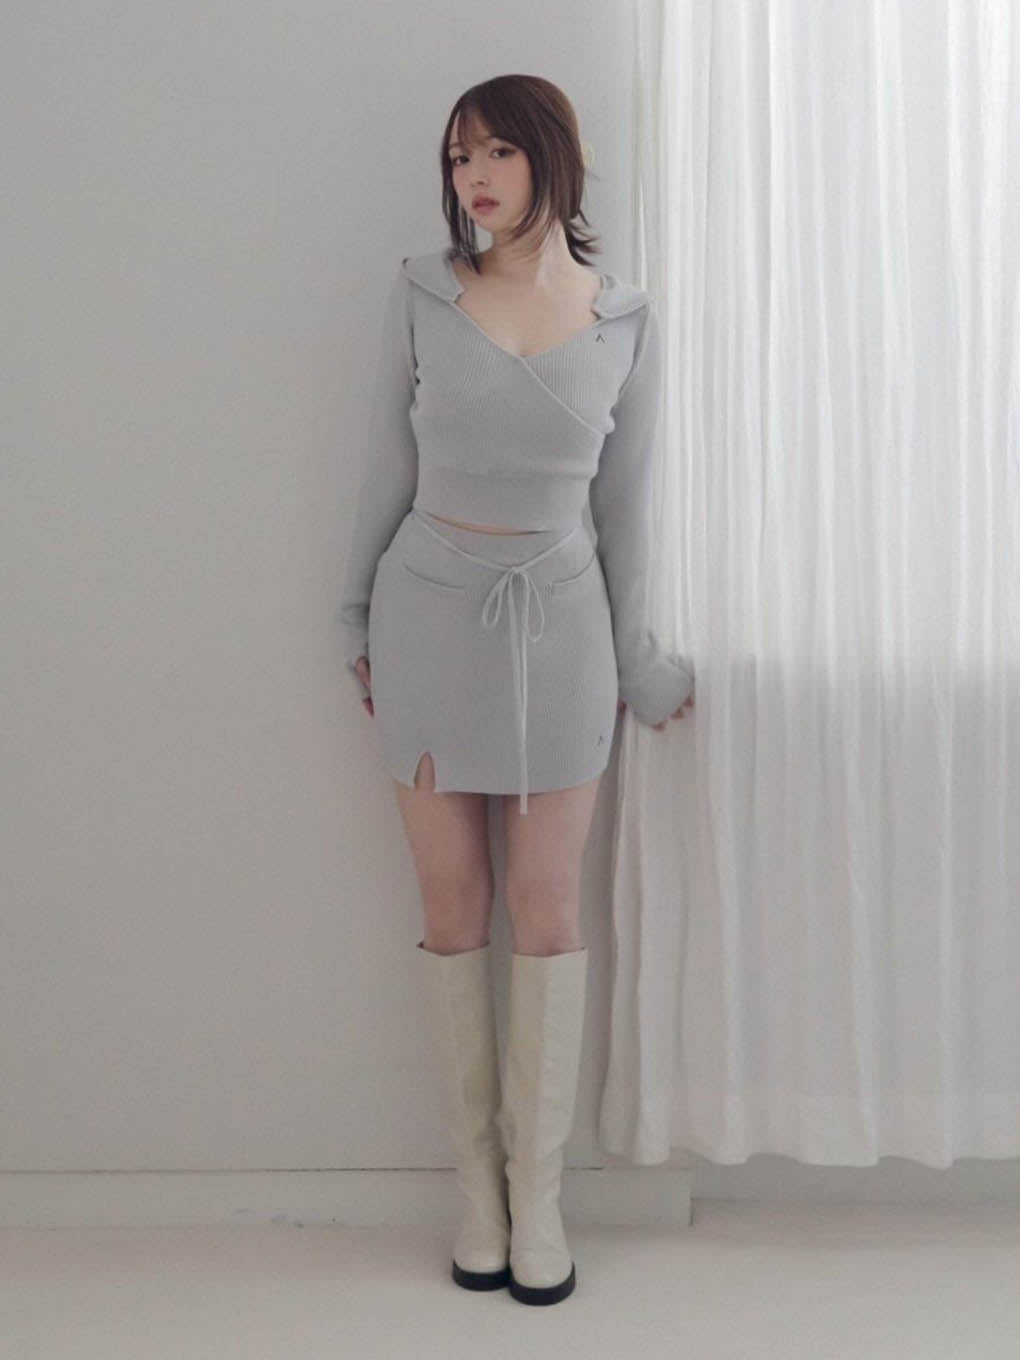 ANDMARY】Lilly silk knit skirt